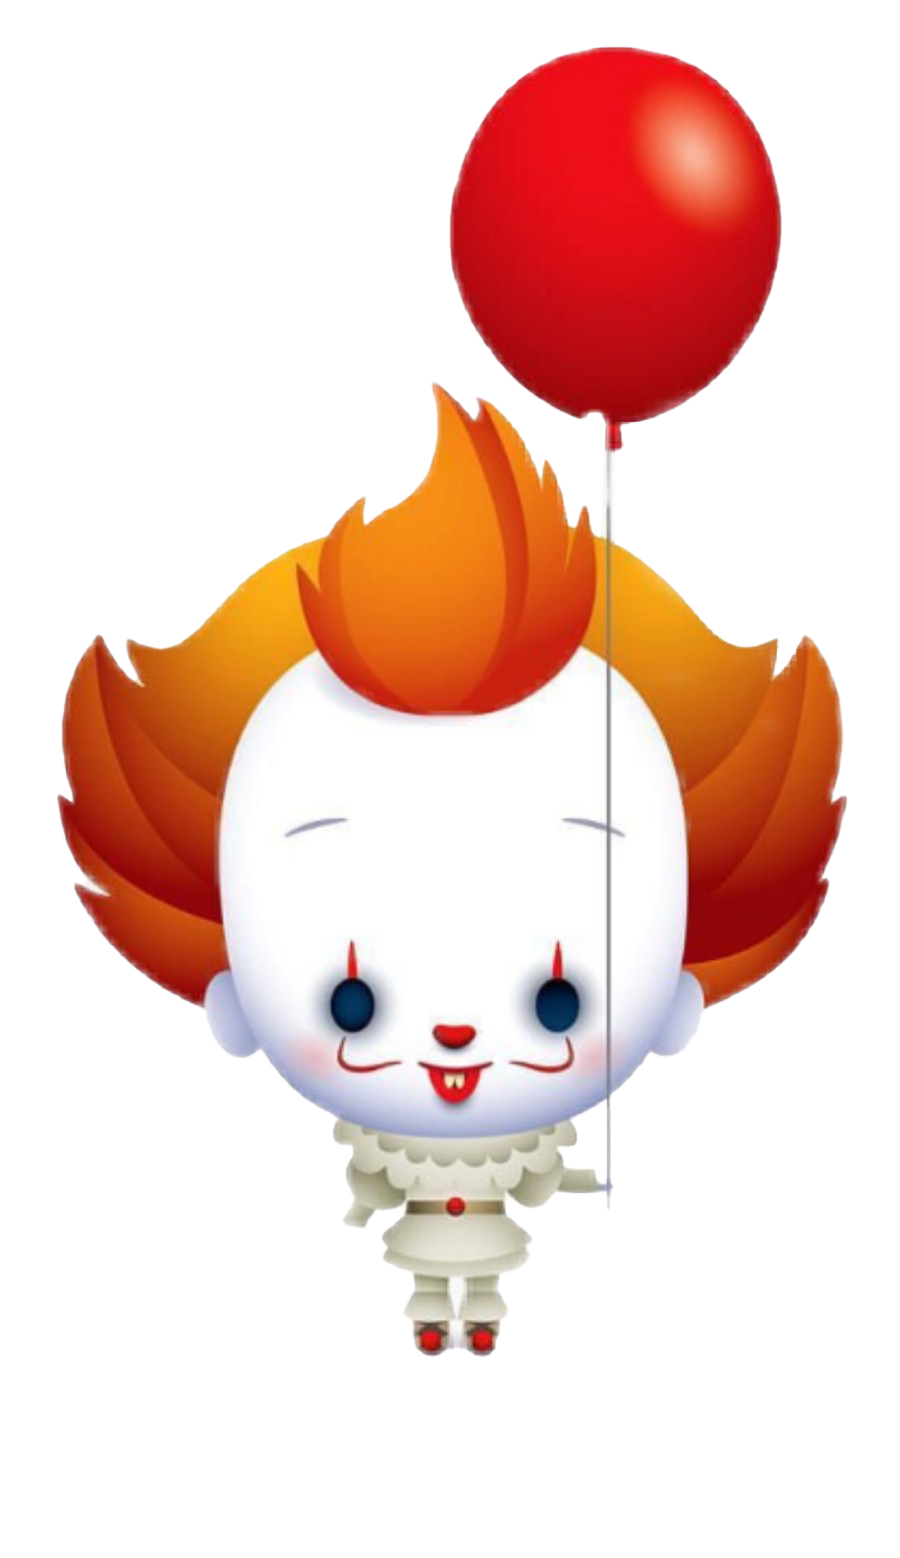 Pennywise ballon PNG Transparant Beeld